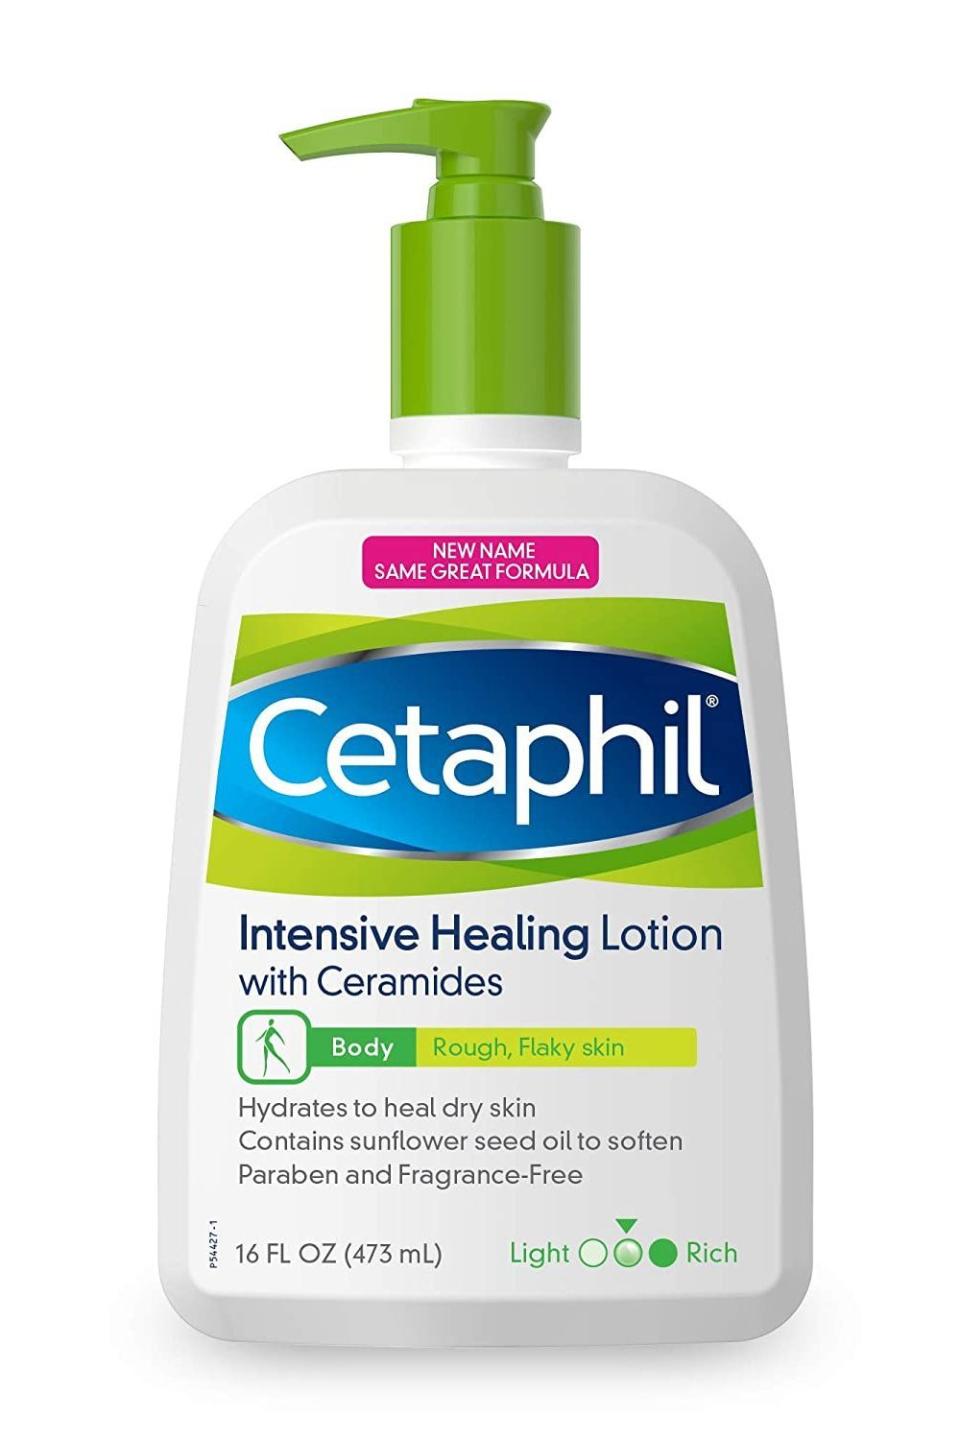 2) Cetaphil Intensive Healing Lotion with Ceramides